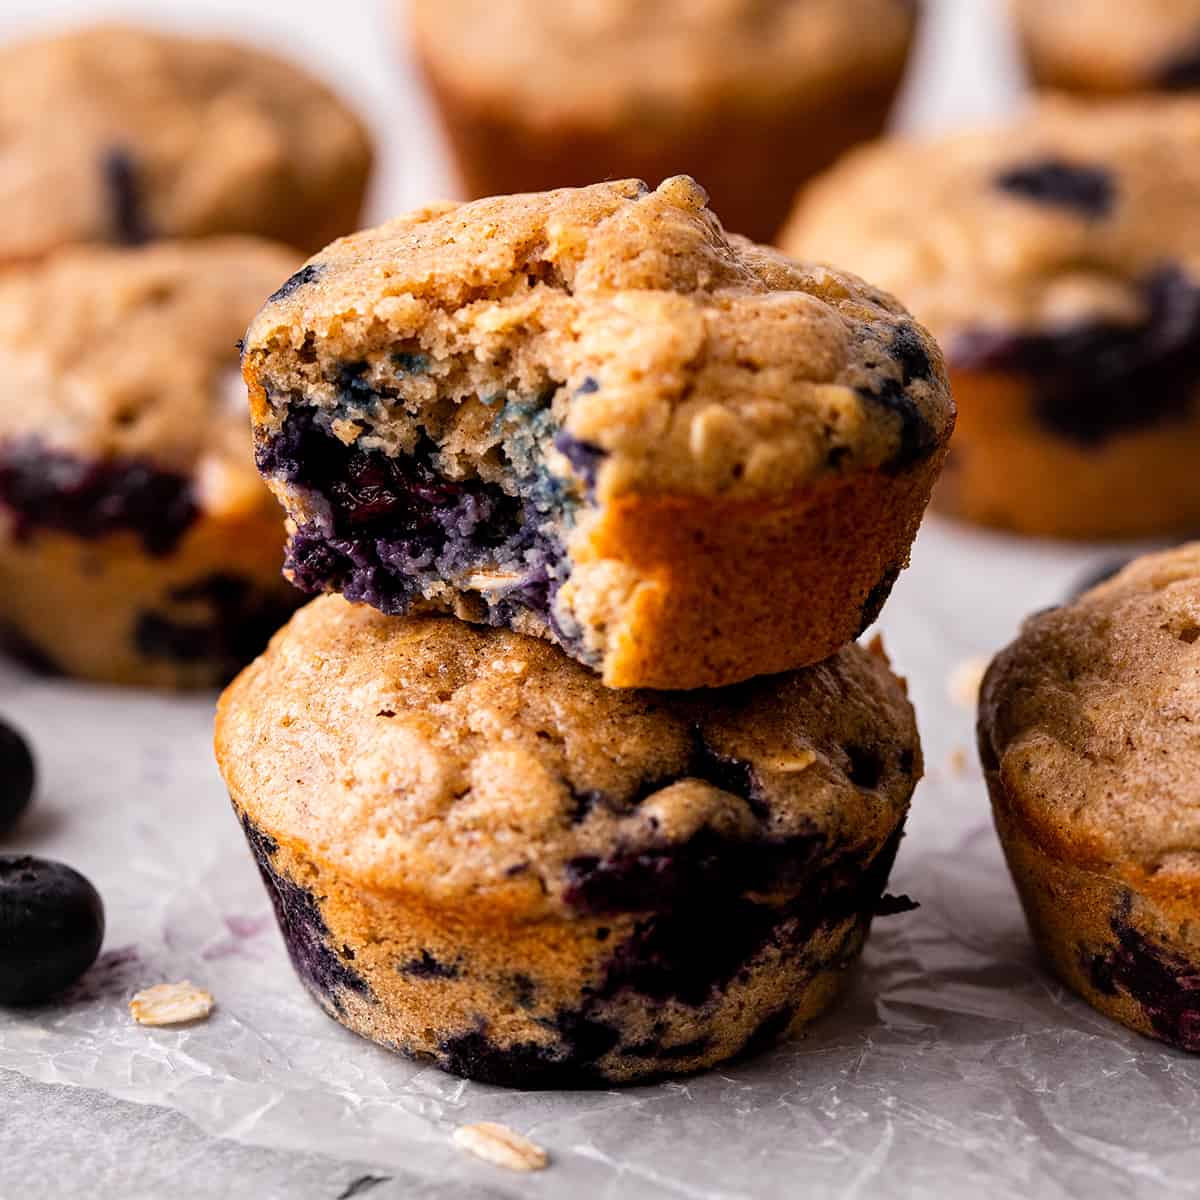 a stack of 2 Blueberry Oatmeal Muffins, the top one with a bite taken out of it